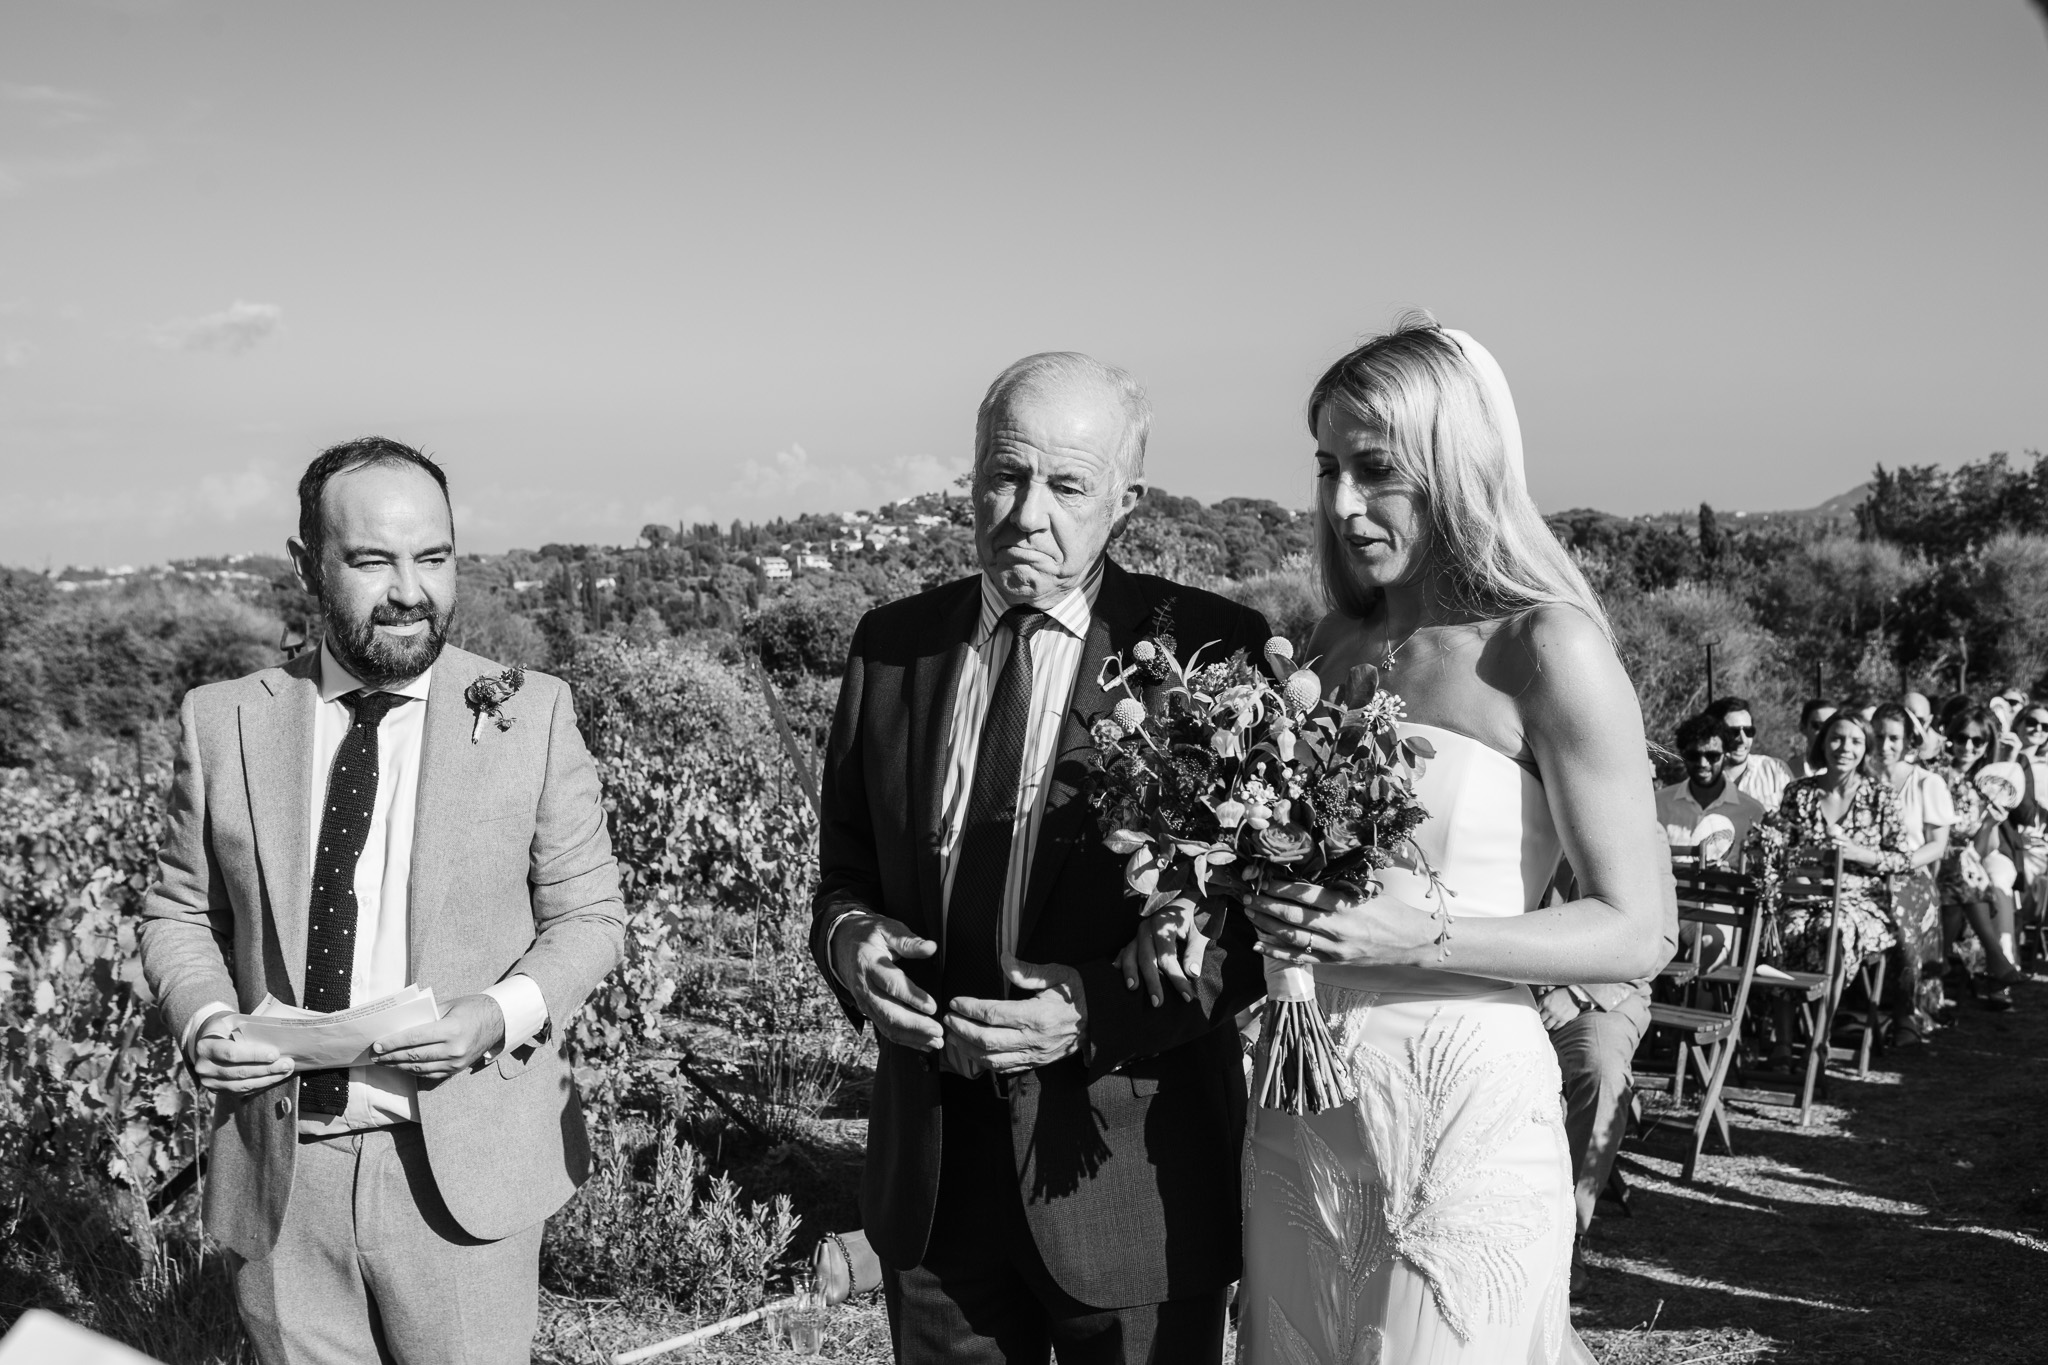 The bride and her dad arrive to the groom at a wedding ceremony in Ambelonas Vineyard, Corfu